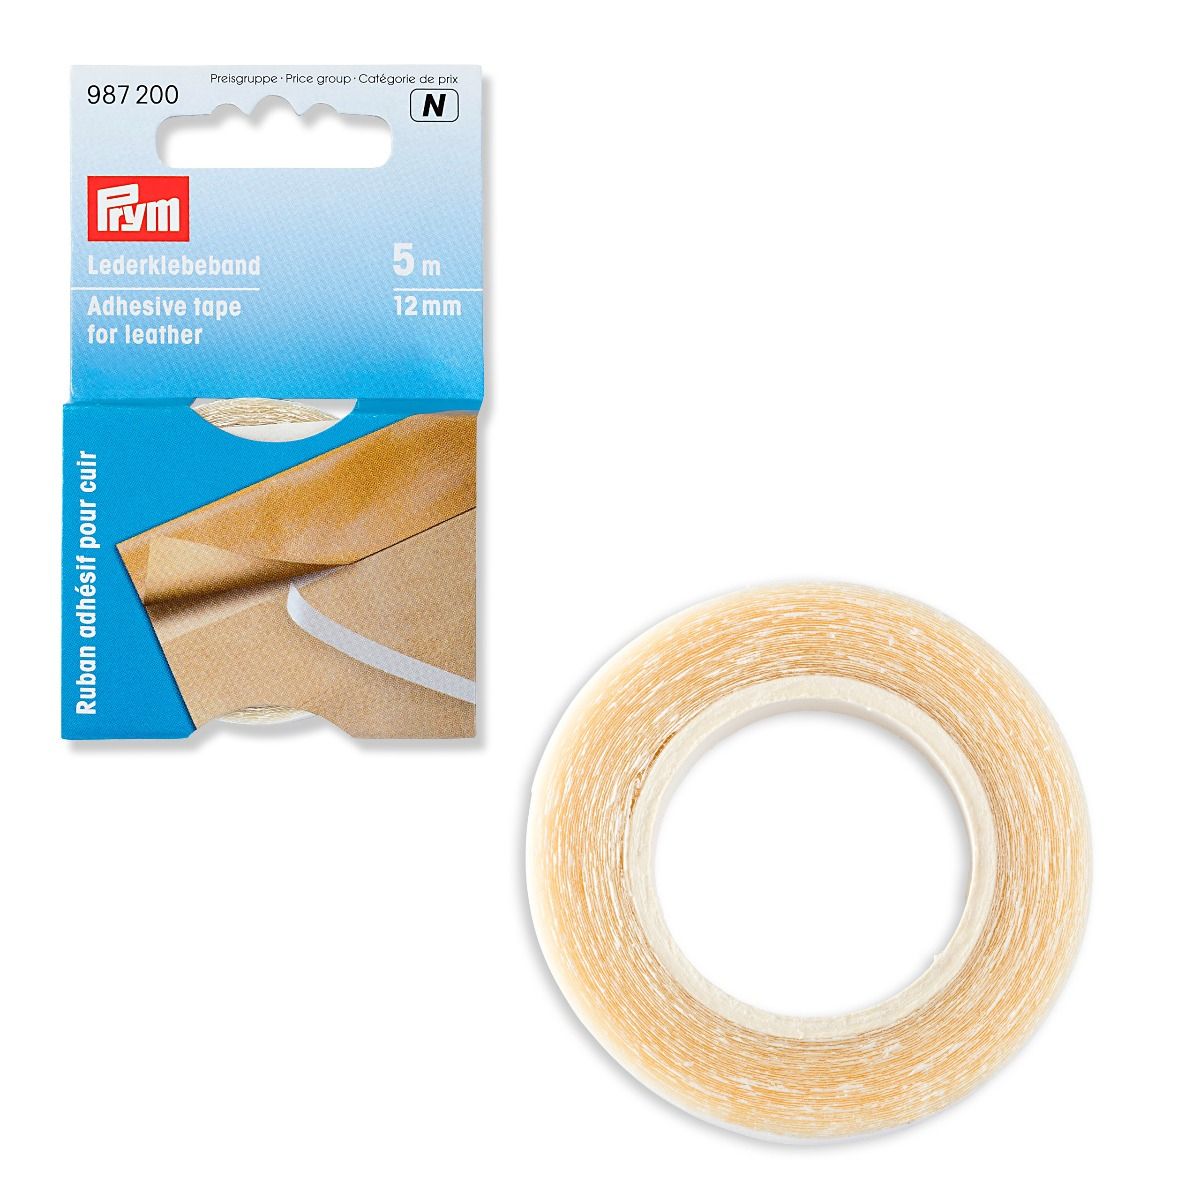 Prym Double Sided Adhesive Tape for Leather 5m x 12 mm 987200.